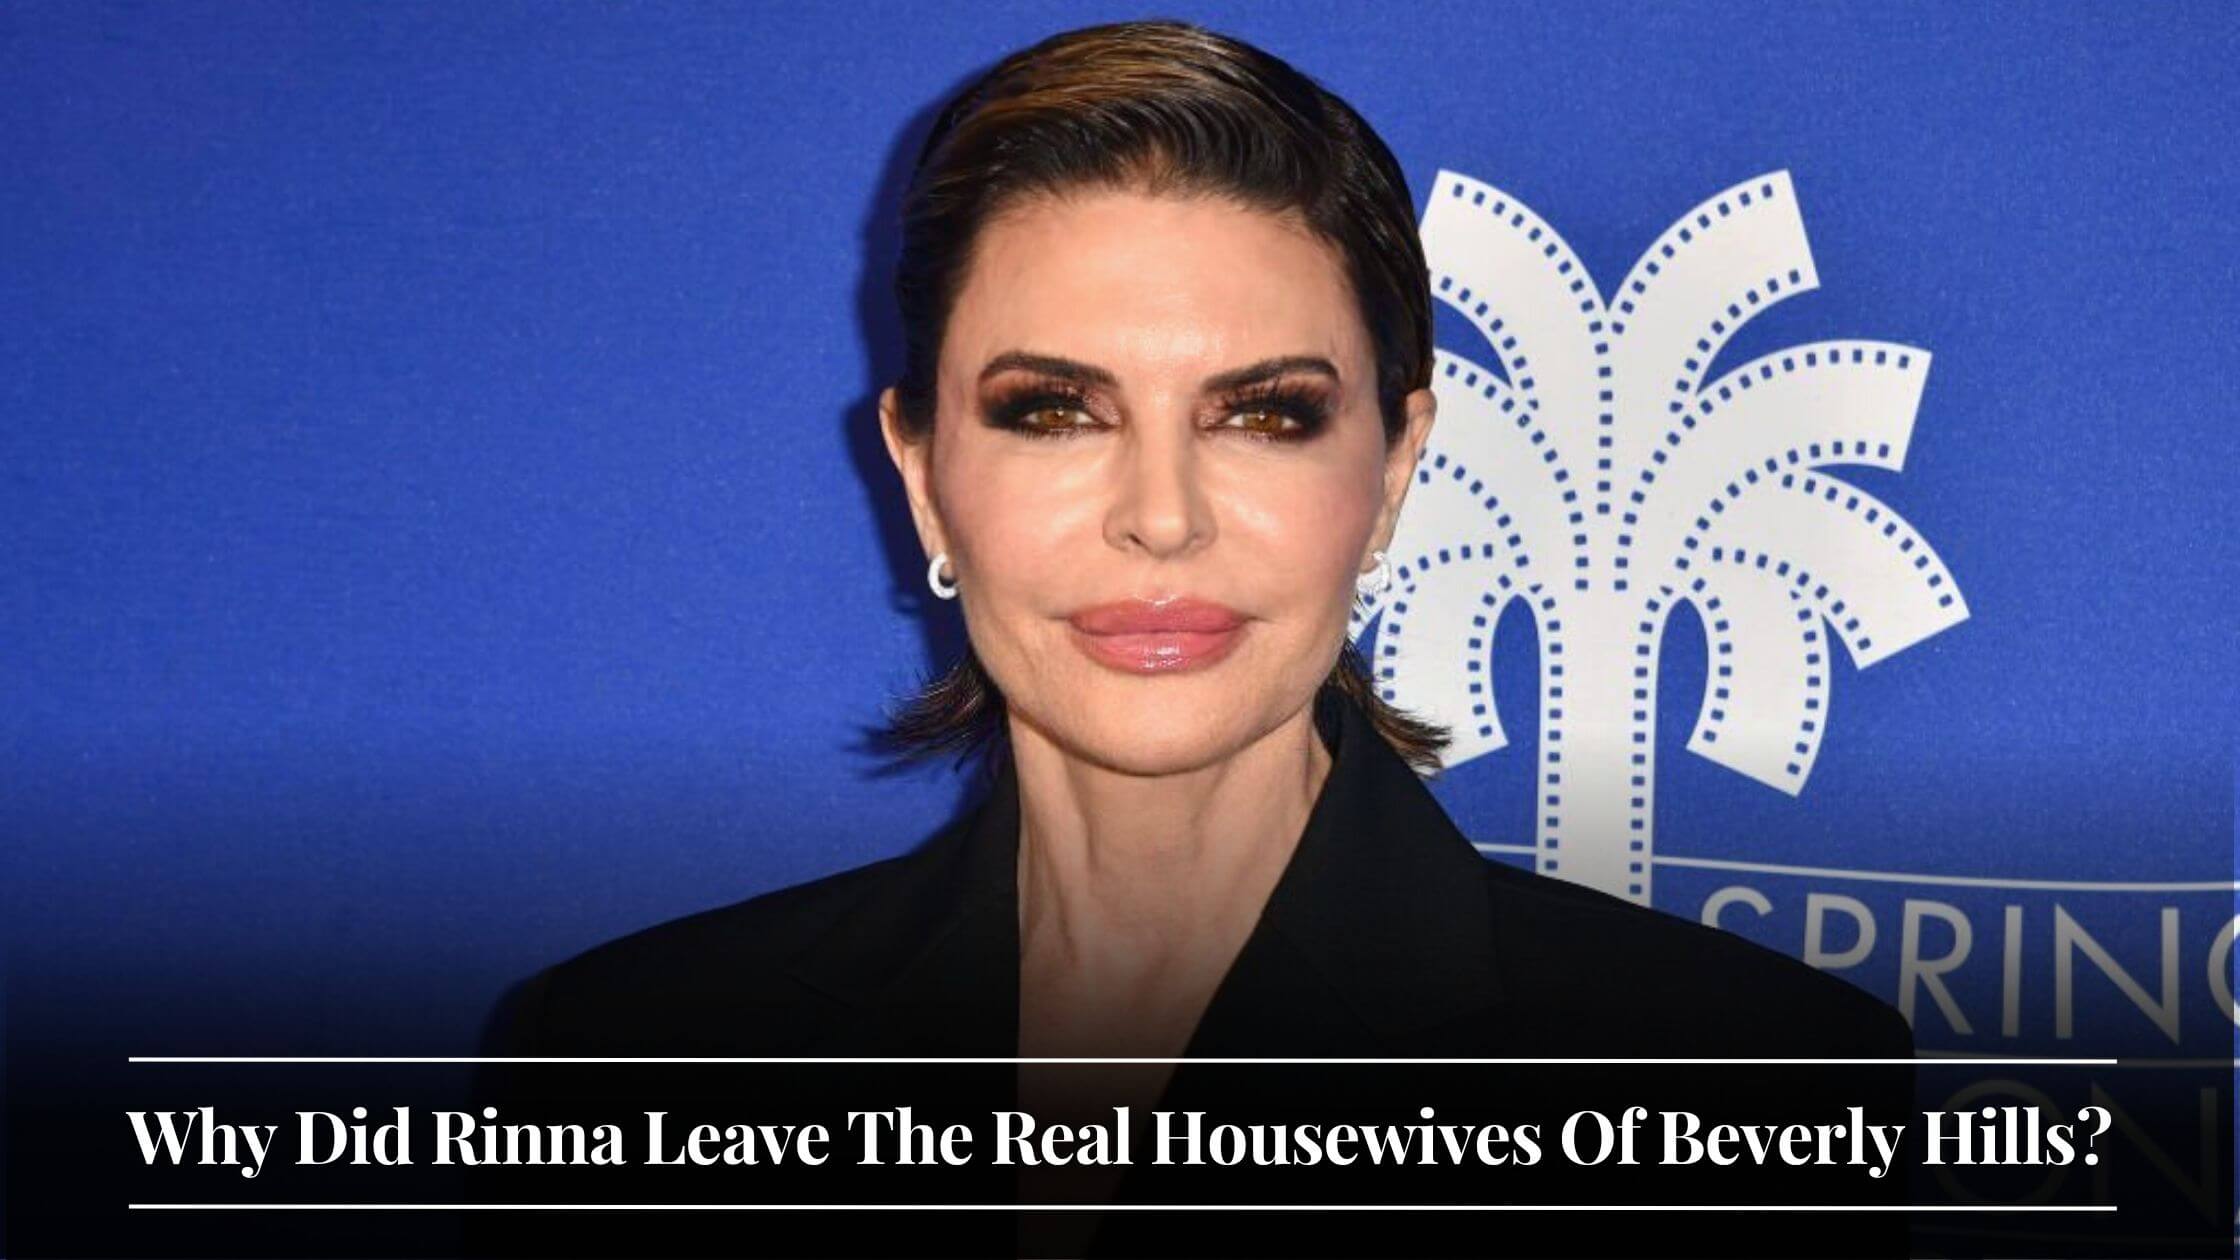 Lisa Rinna Saying Goodbye To The Real Housewives Of Beverly Hills